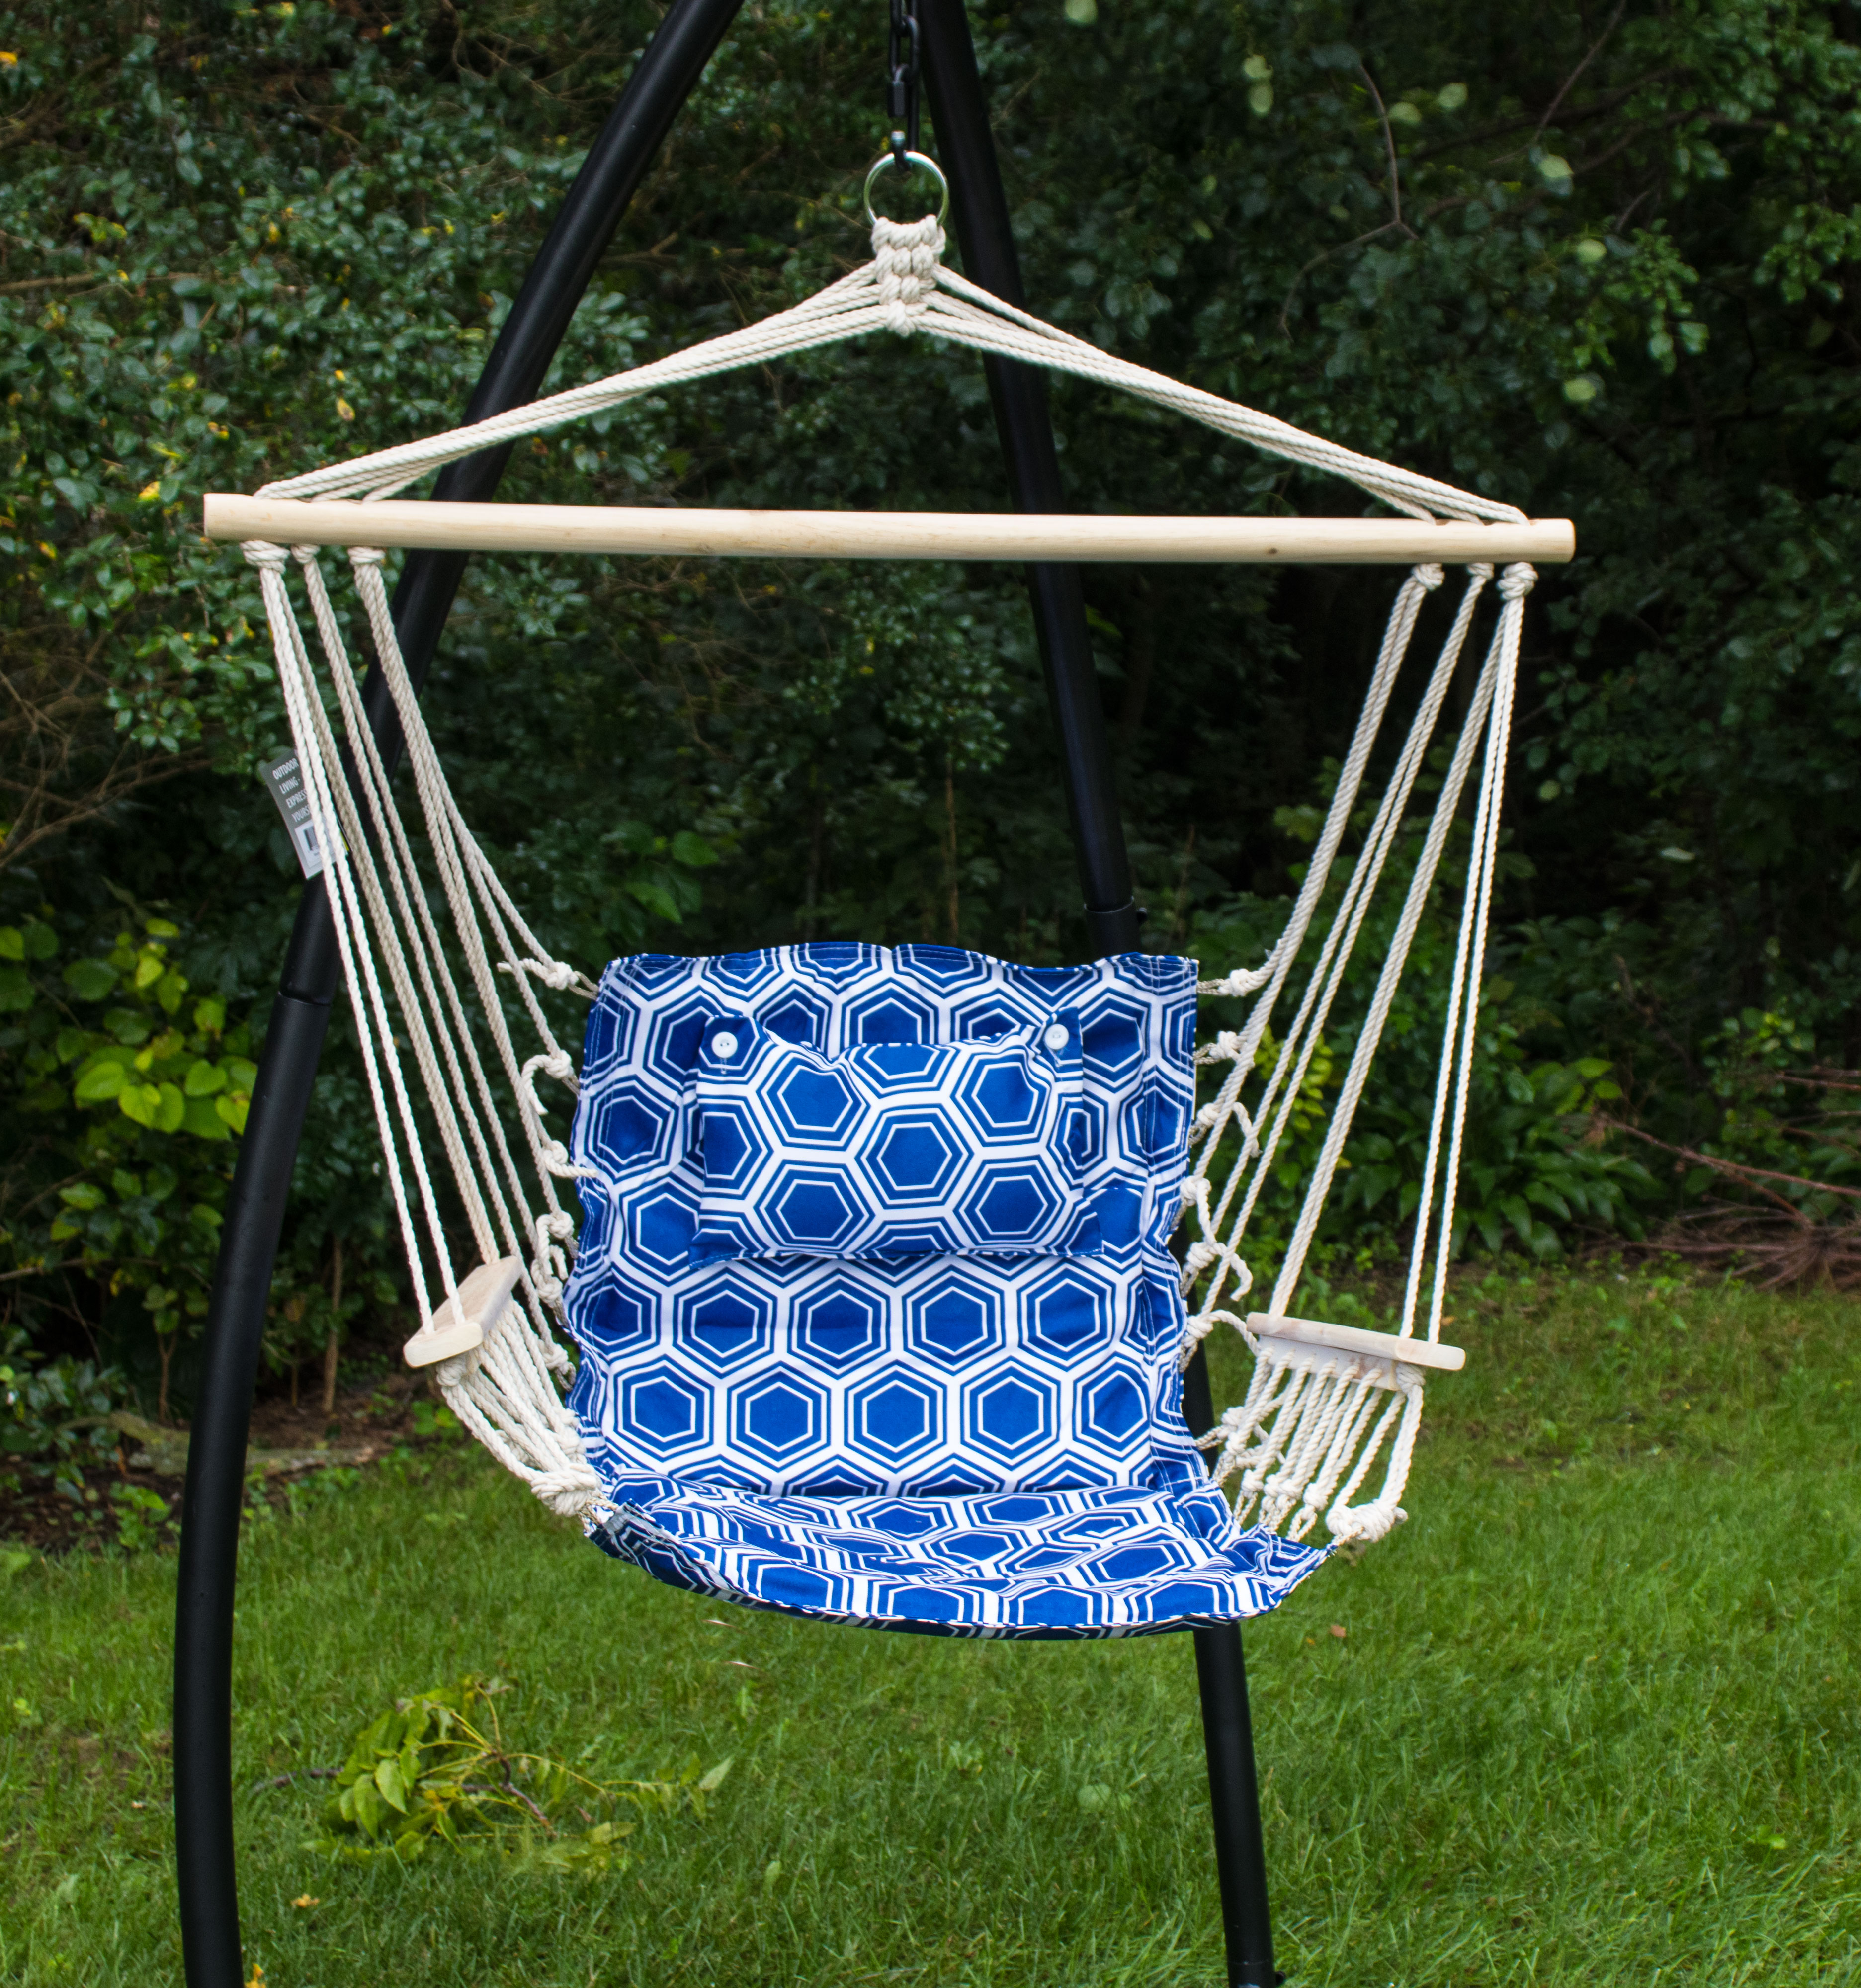 Hammock Chair with Stand - Blue w/ White Rings Pattern - image 2 of 2